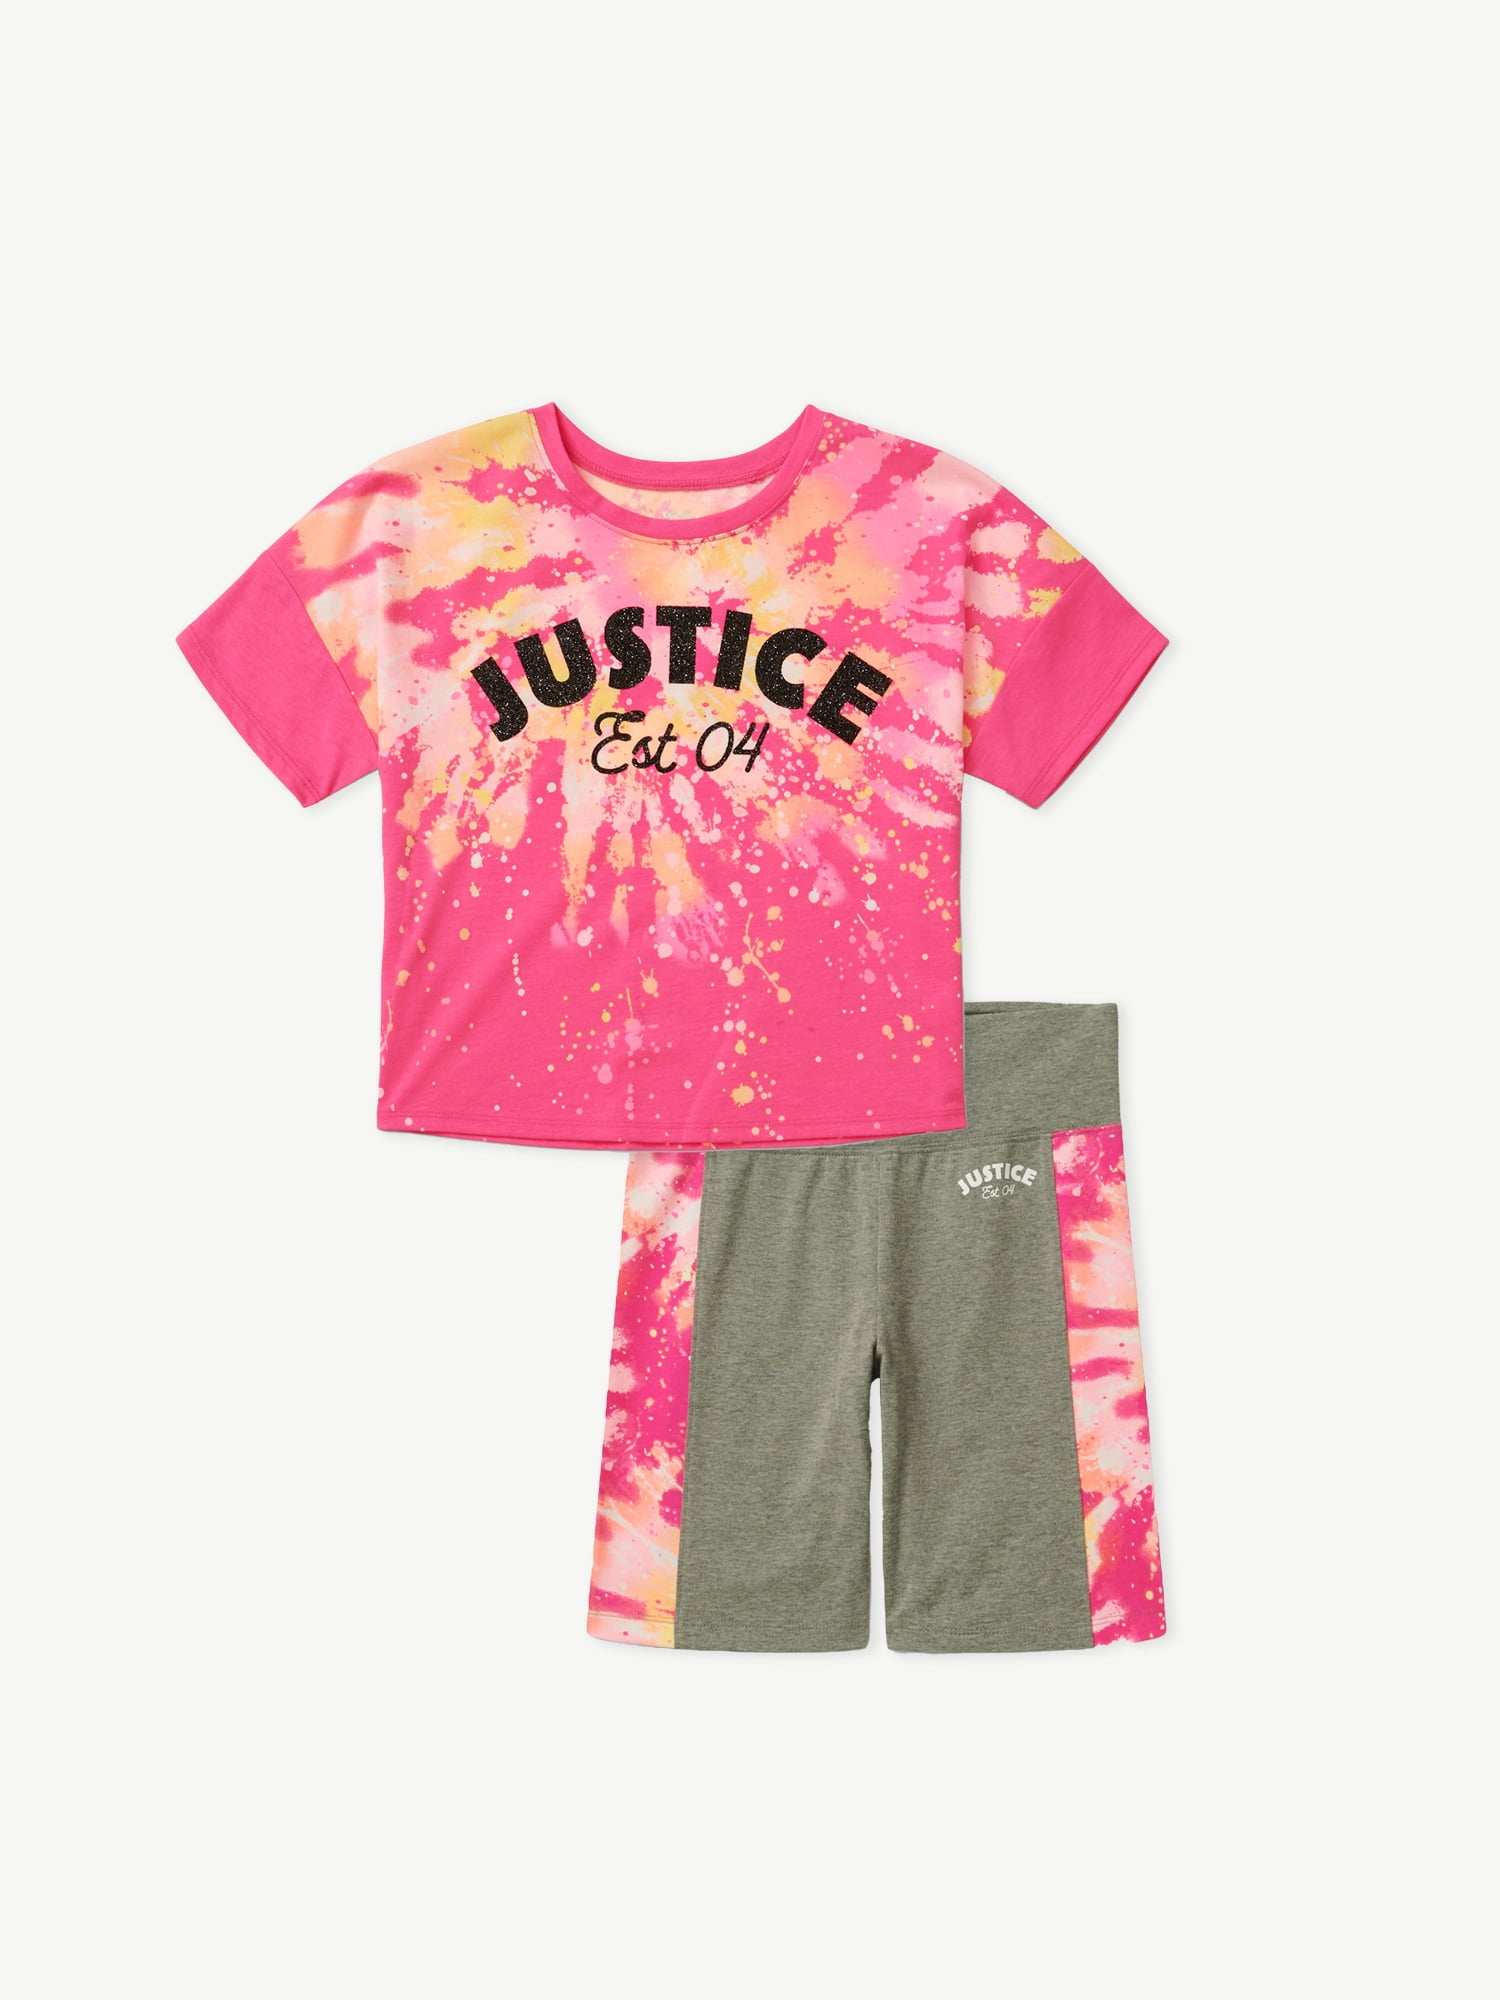 Justice Girls Collection X Shine Blocked 2-Piece Outfit Set, sizes XS-XLP 